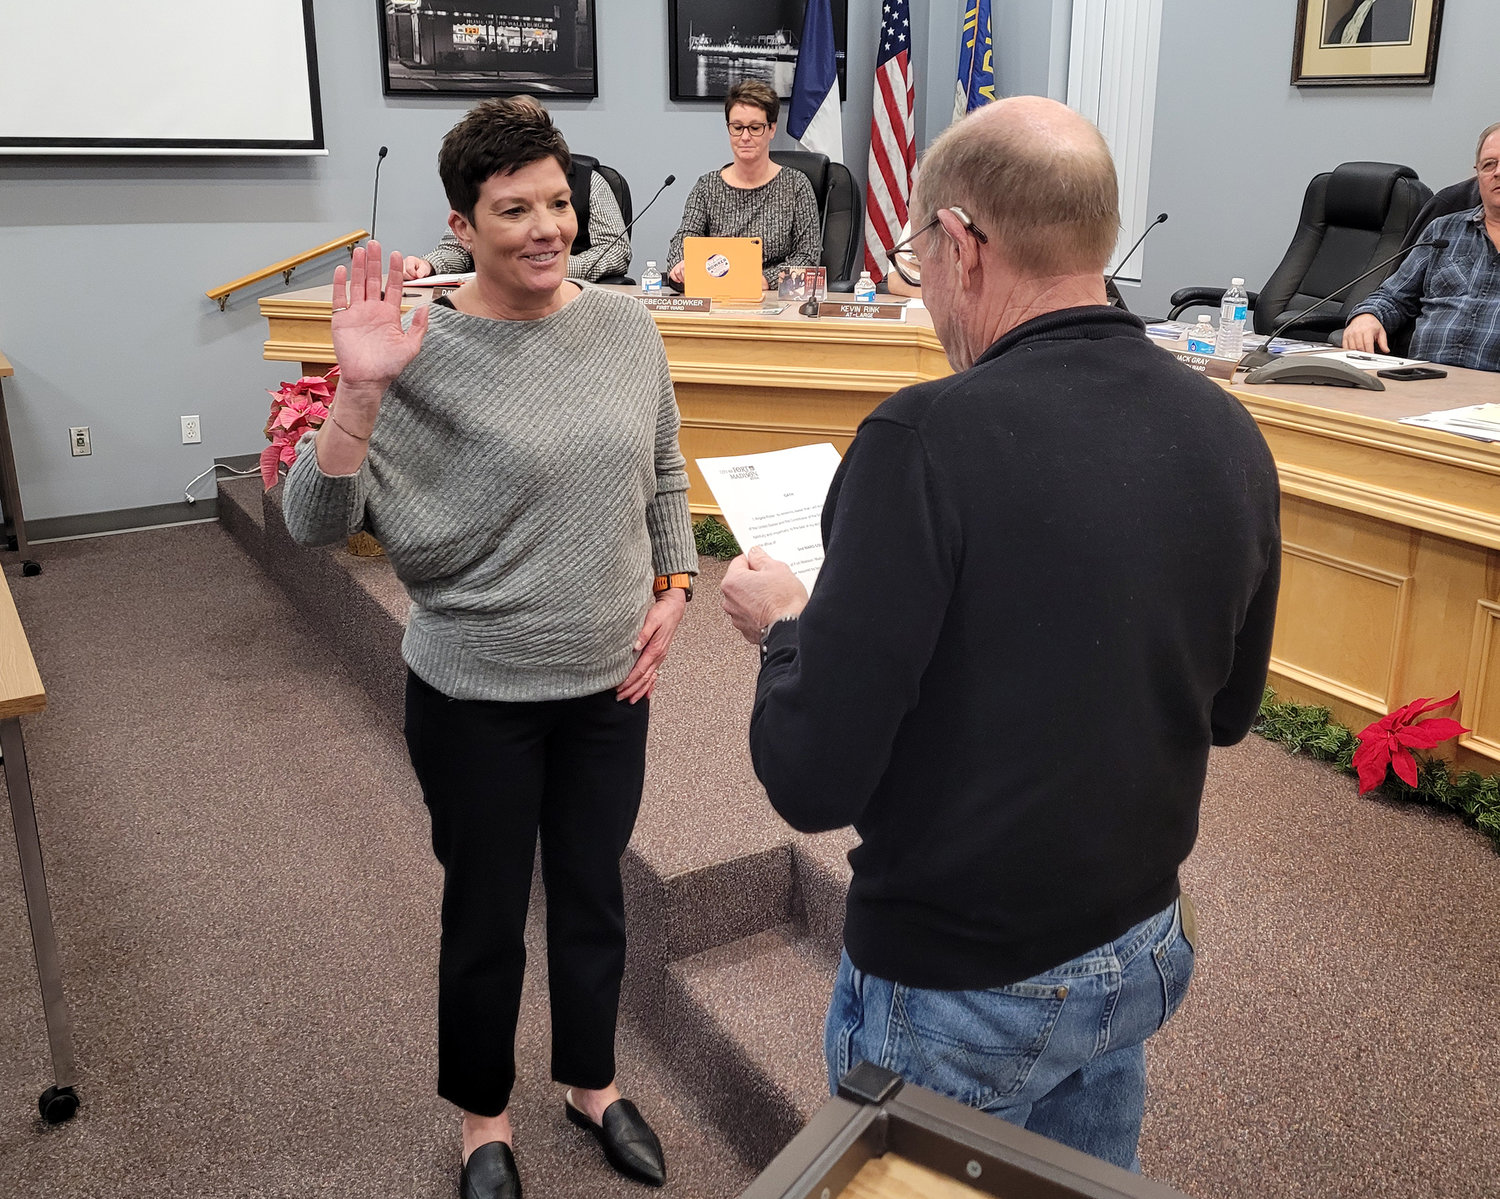 Newly appointed Fort Madison City Councilwoman Angela Roller was sworn in Tuesday night at the council's first regular meeting of 2023.